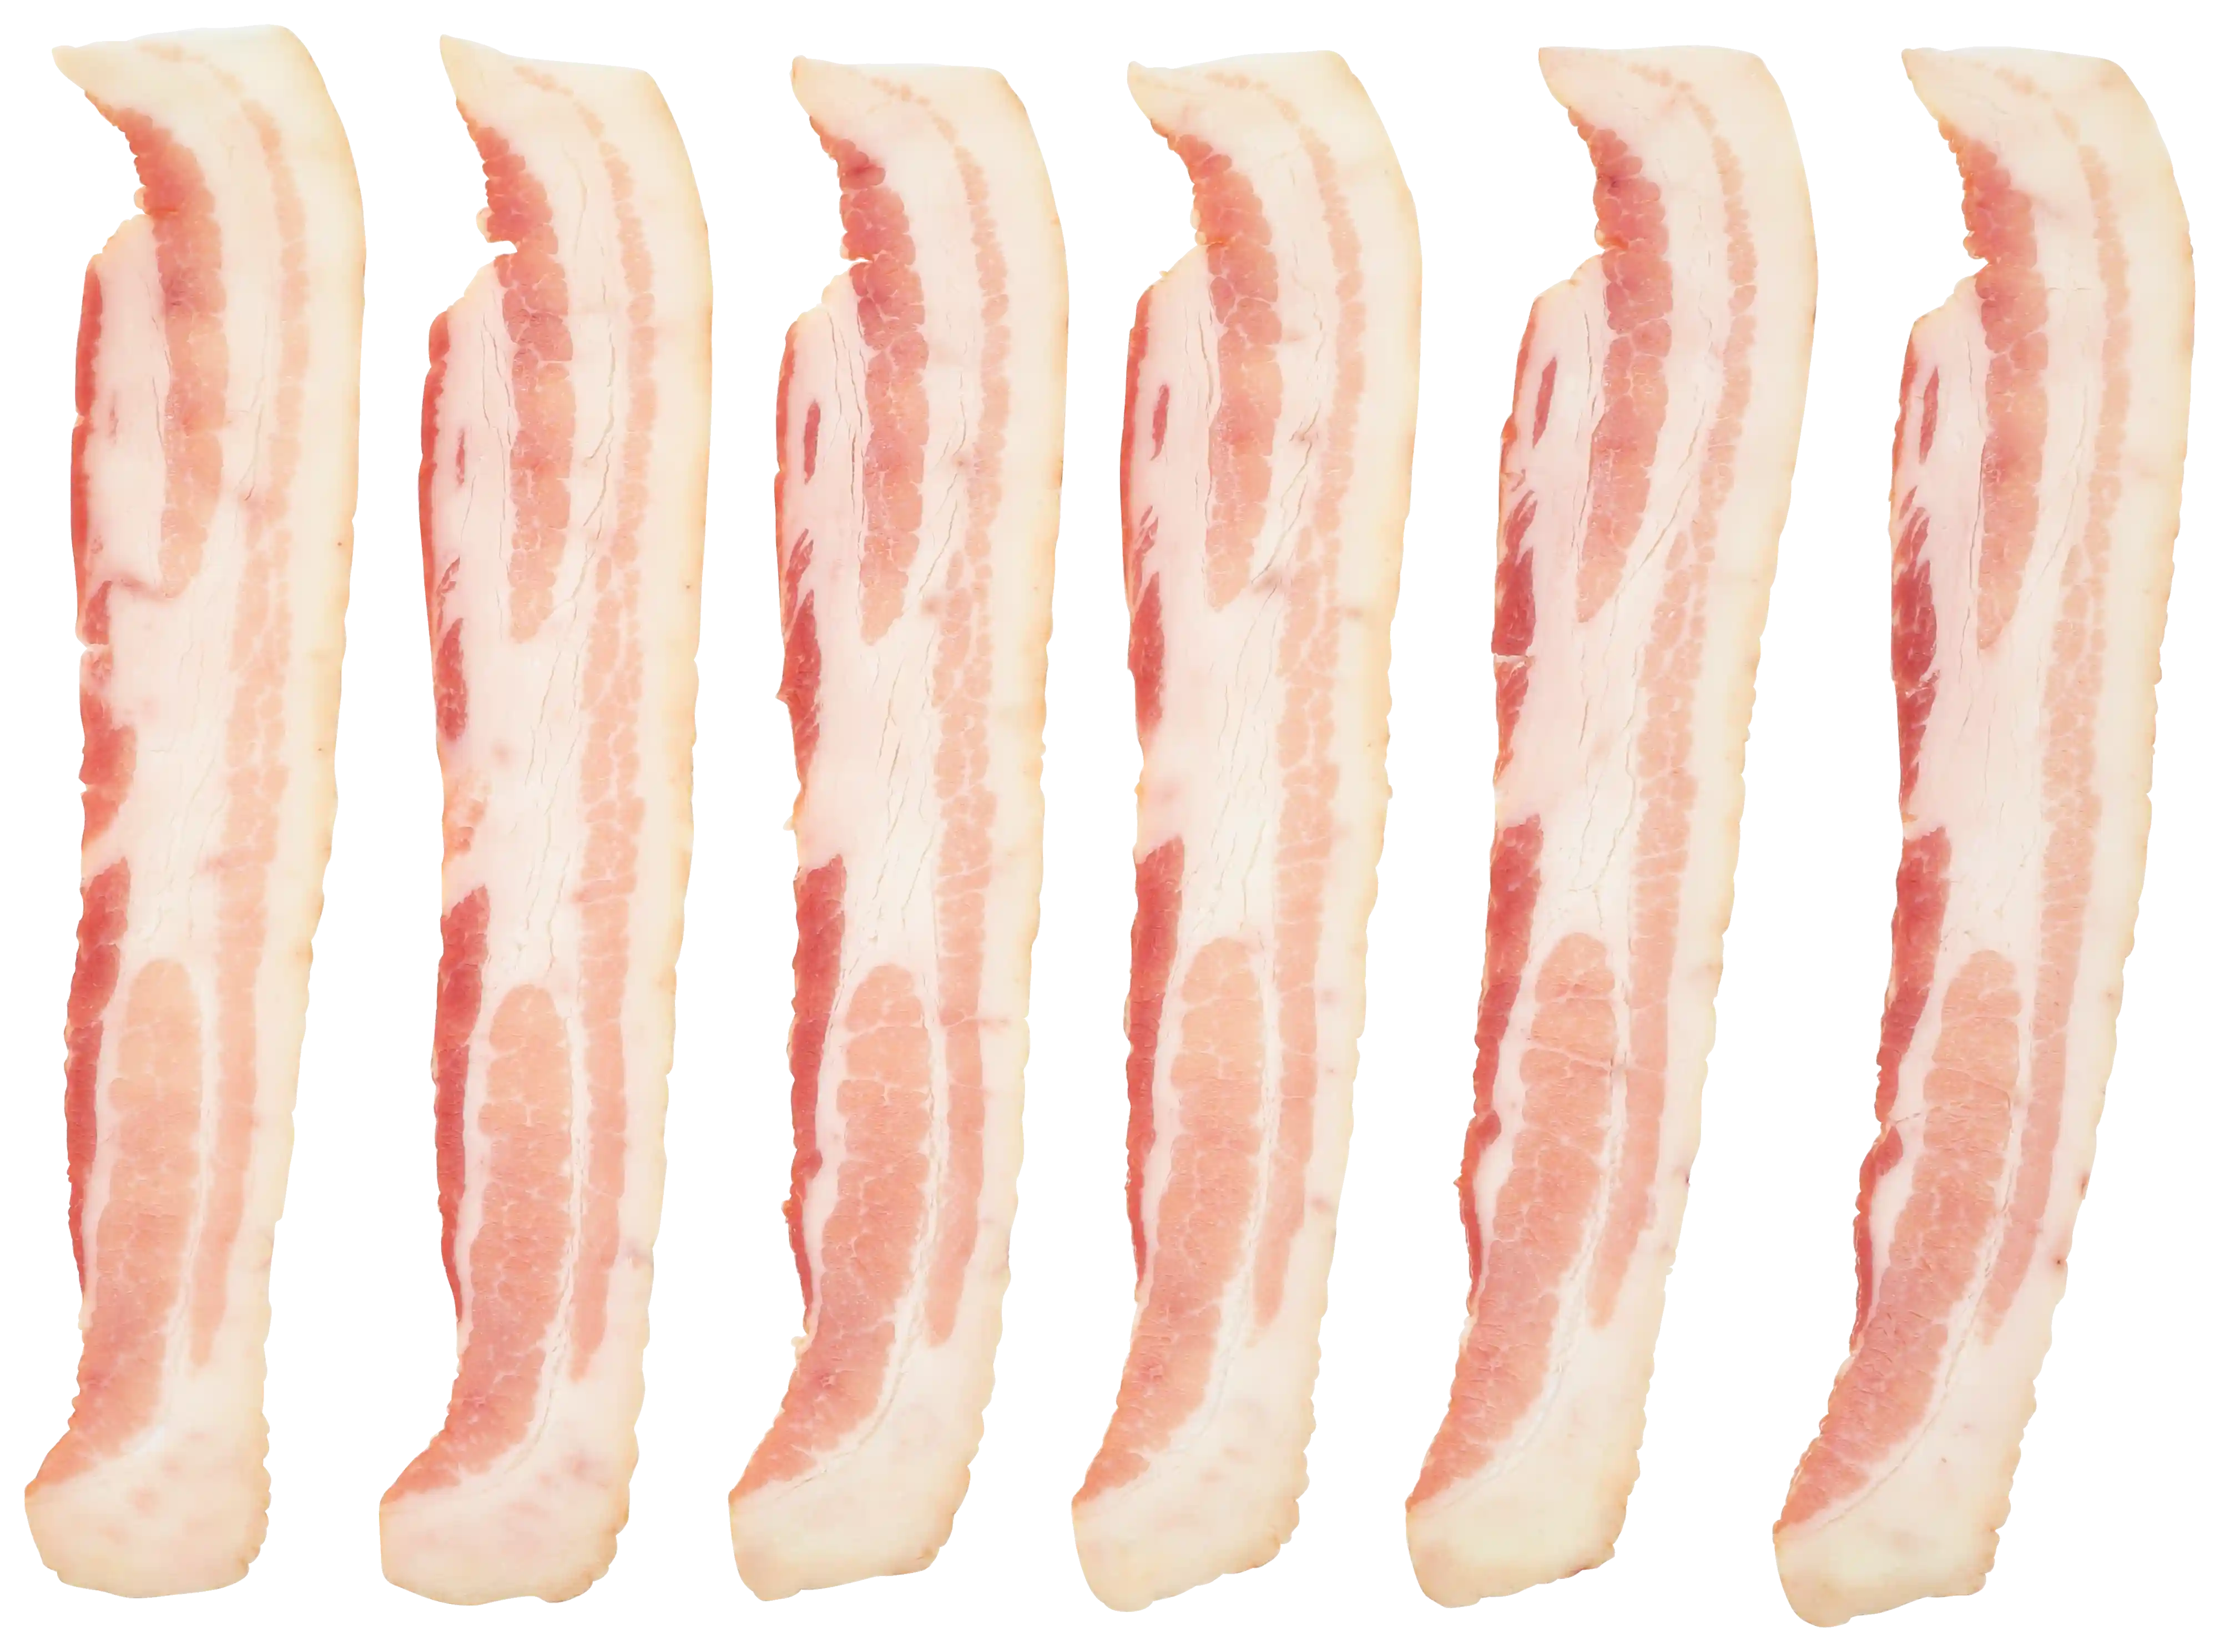 Wright® Brand Naturally Hickory Smoked Extra Thin Sliced Bacon, Flat-Pack®, 15 Lbs, 22-26 Slices per Pound, Frozen_image_21